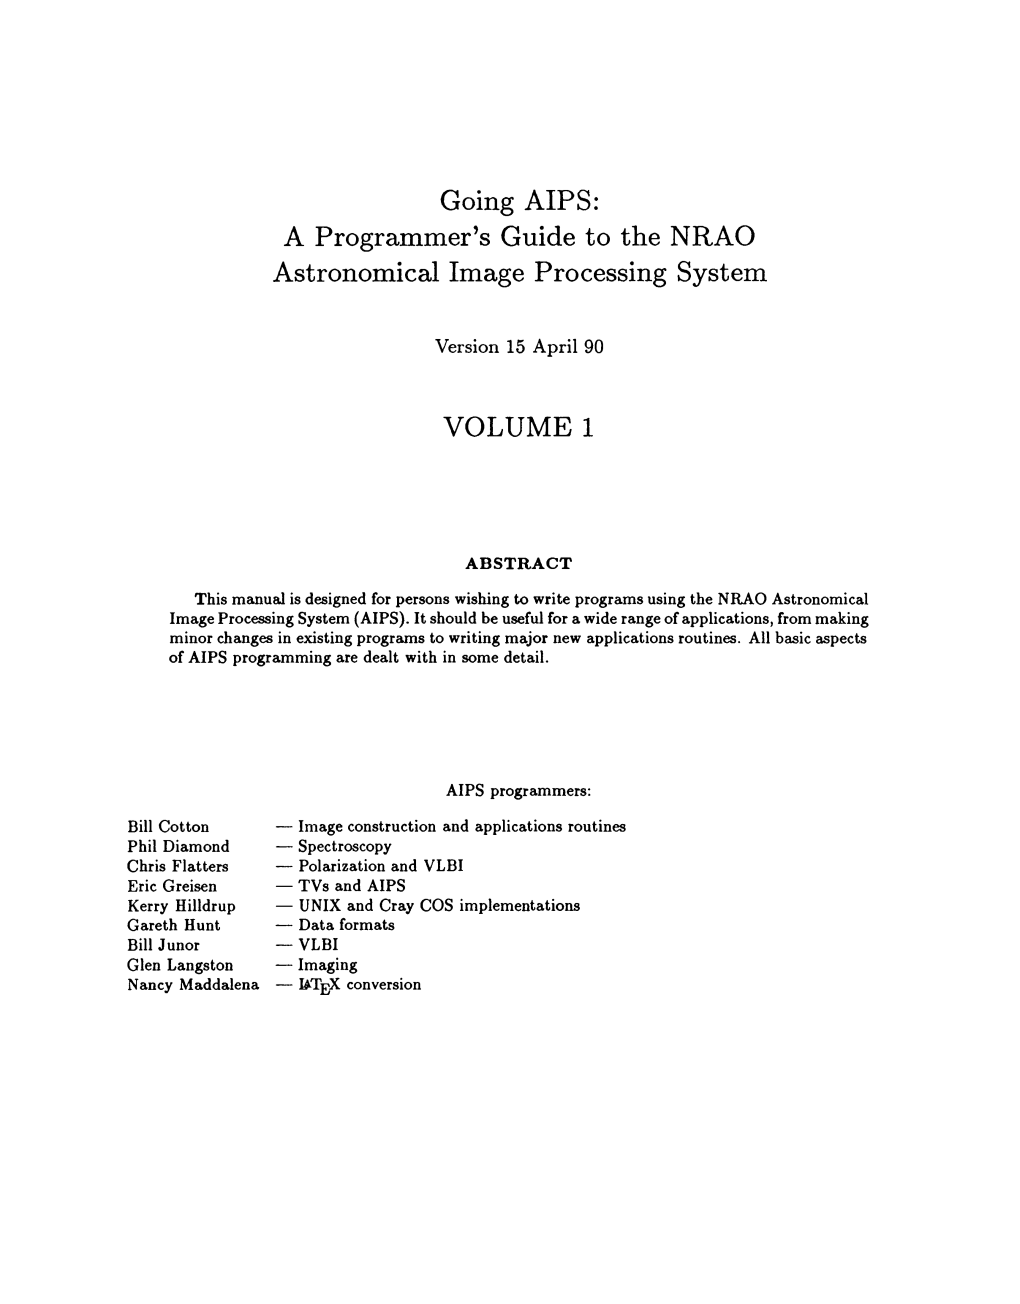 Going AIPS: a Programmer's Guide to the NRAO Astronomical Image